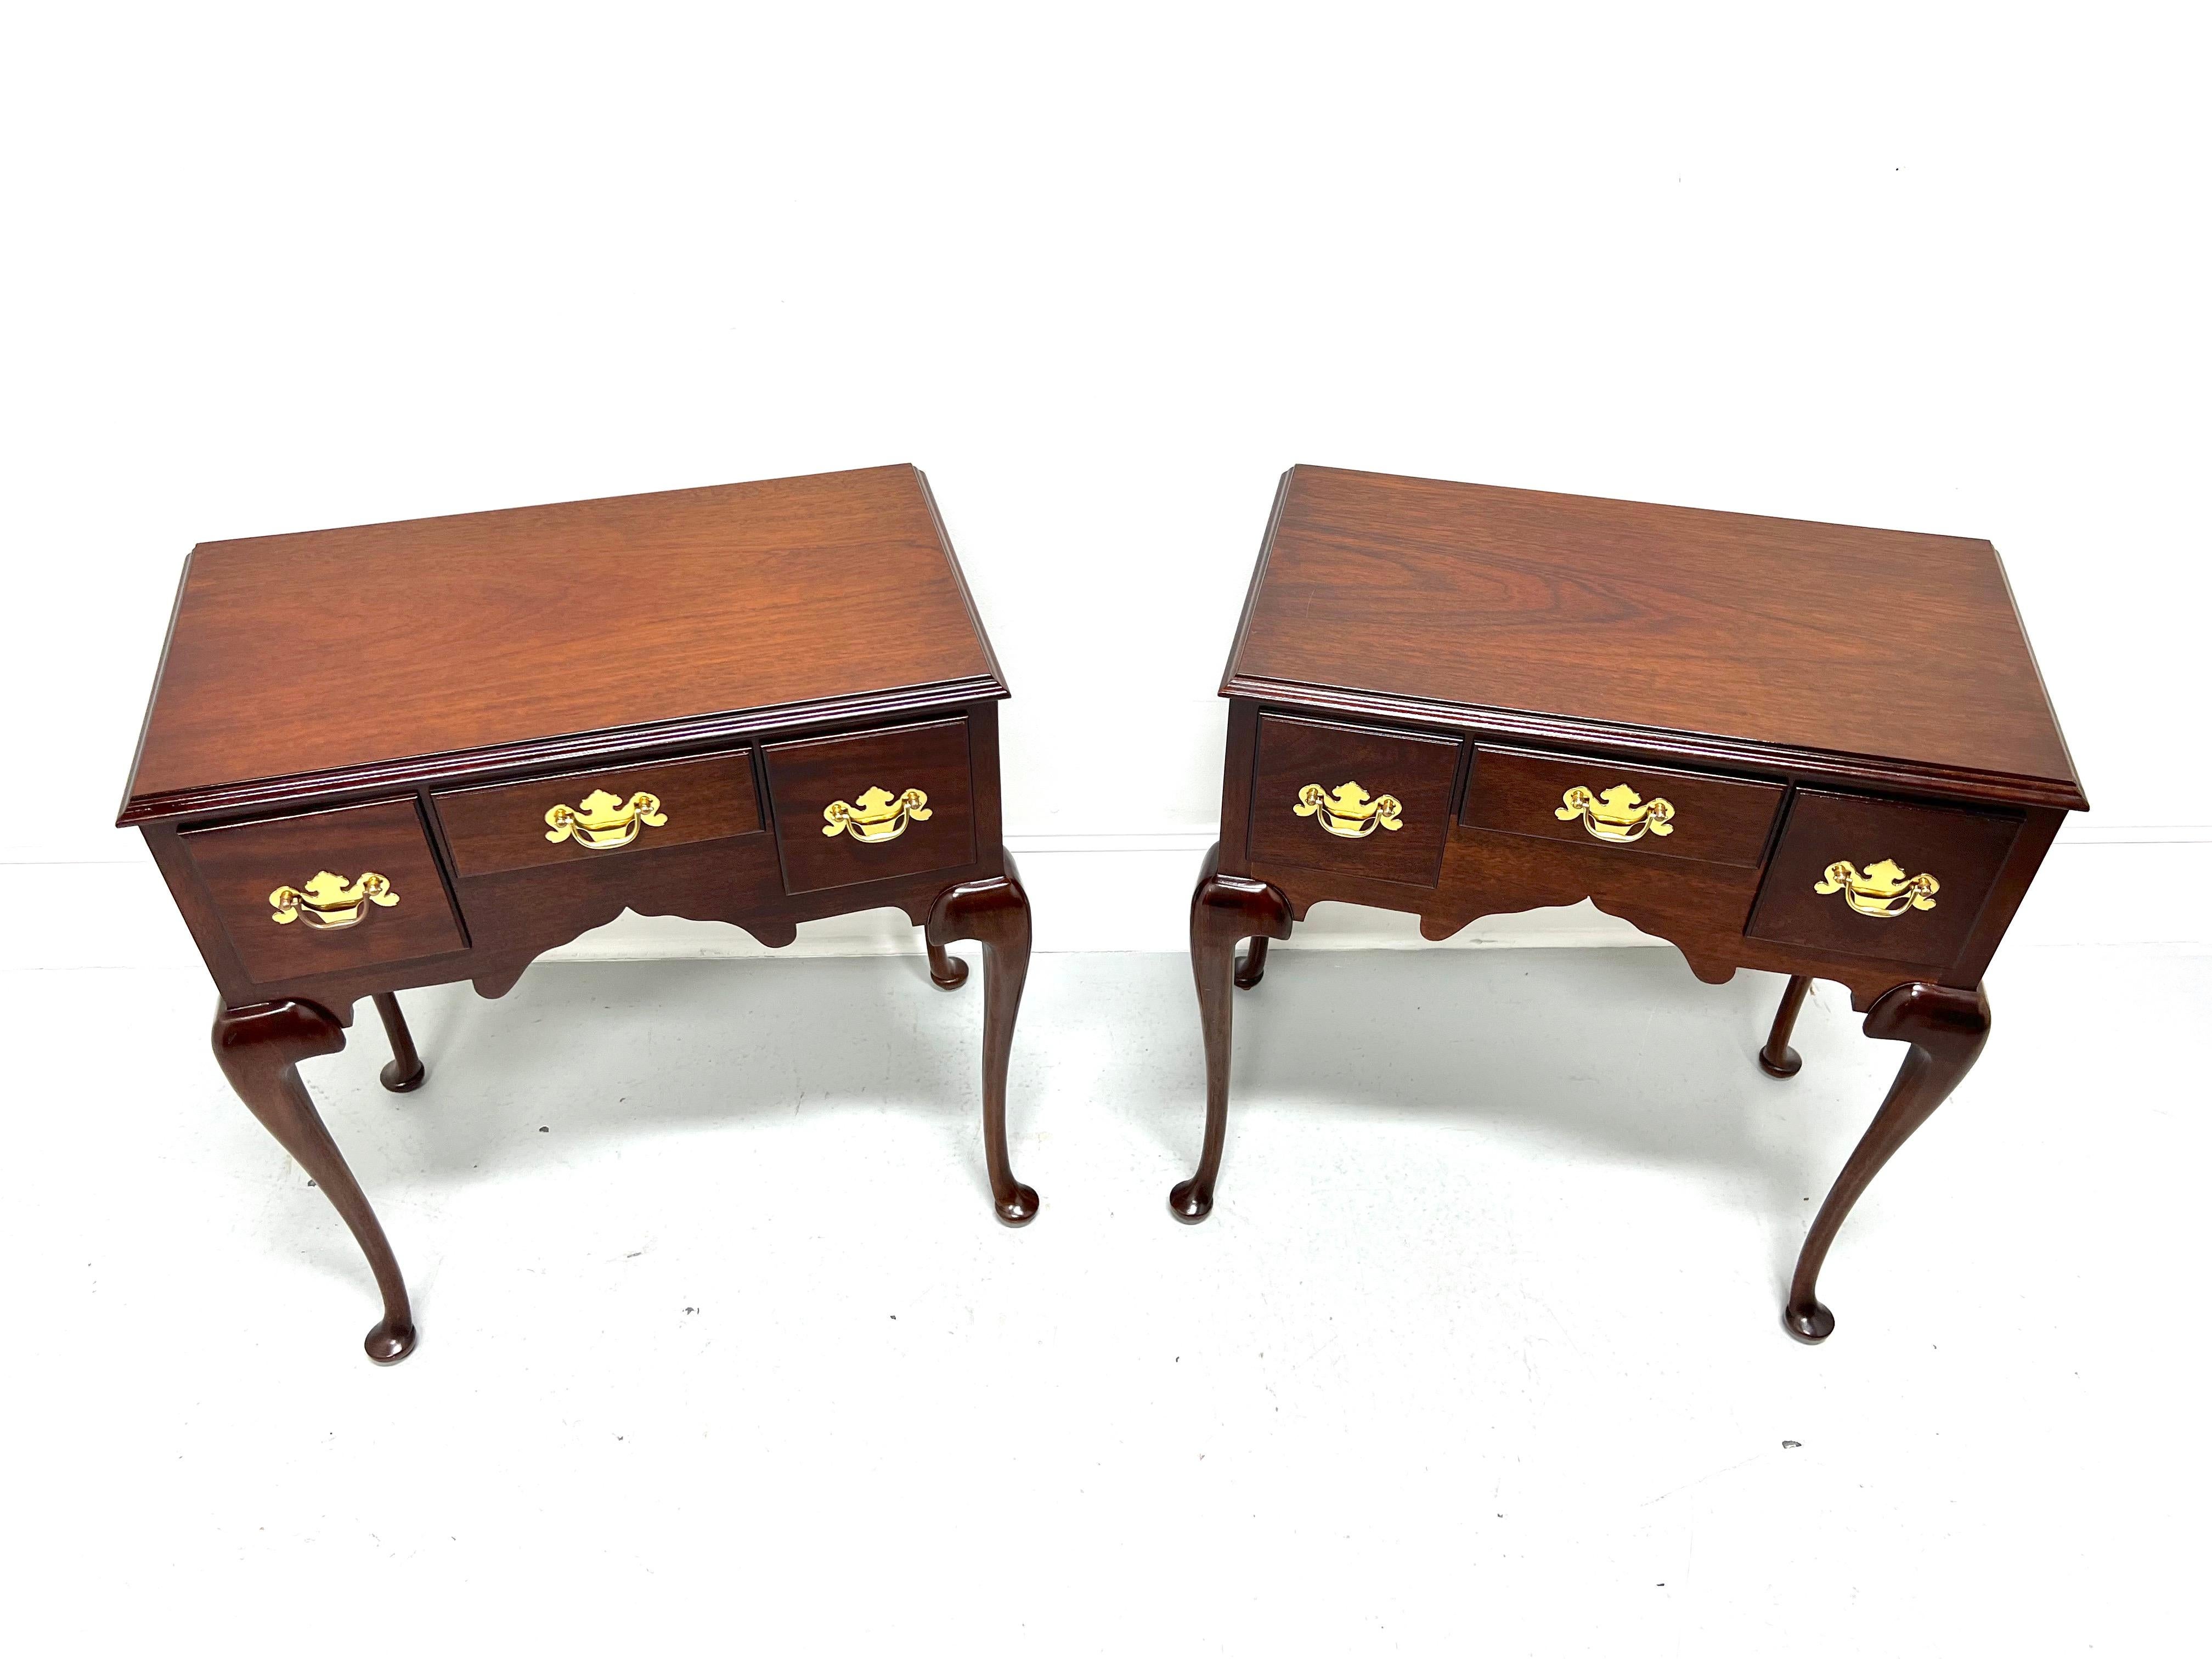 A pair of Queen Anne lowboy style bedside / side tables by Madison Square. Mahogany with brass hardware, ogee edge to top, carved apron, cabriole legs, and pad feet. Features three small drawers of dovetail construction. Made in Hanover,